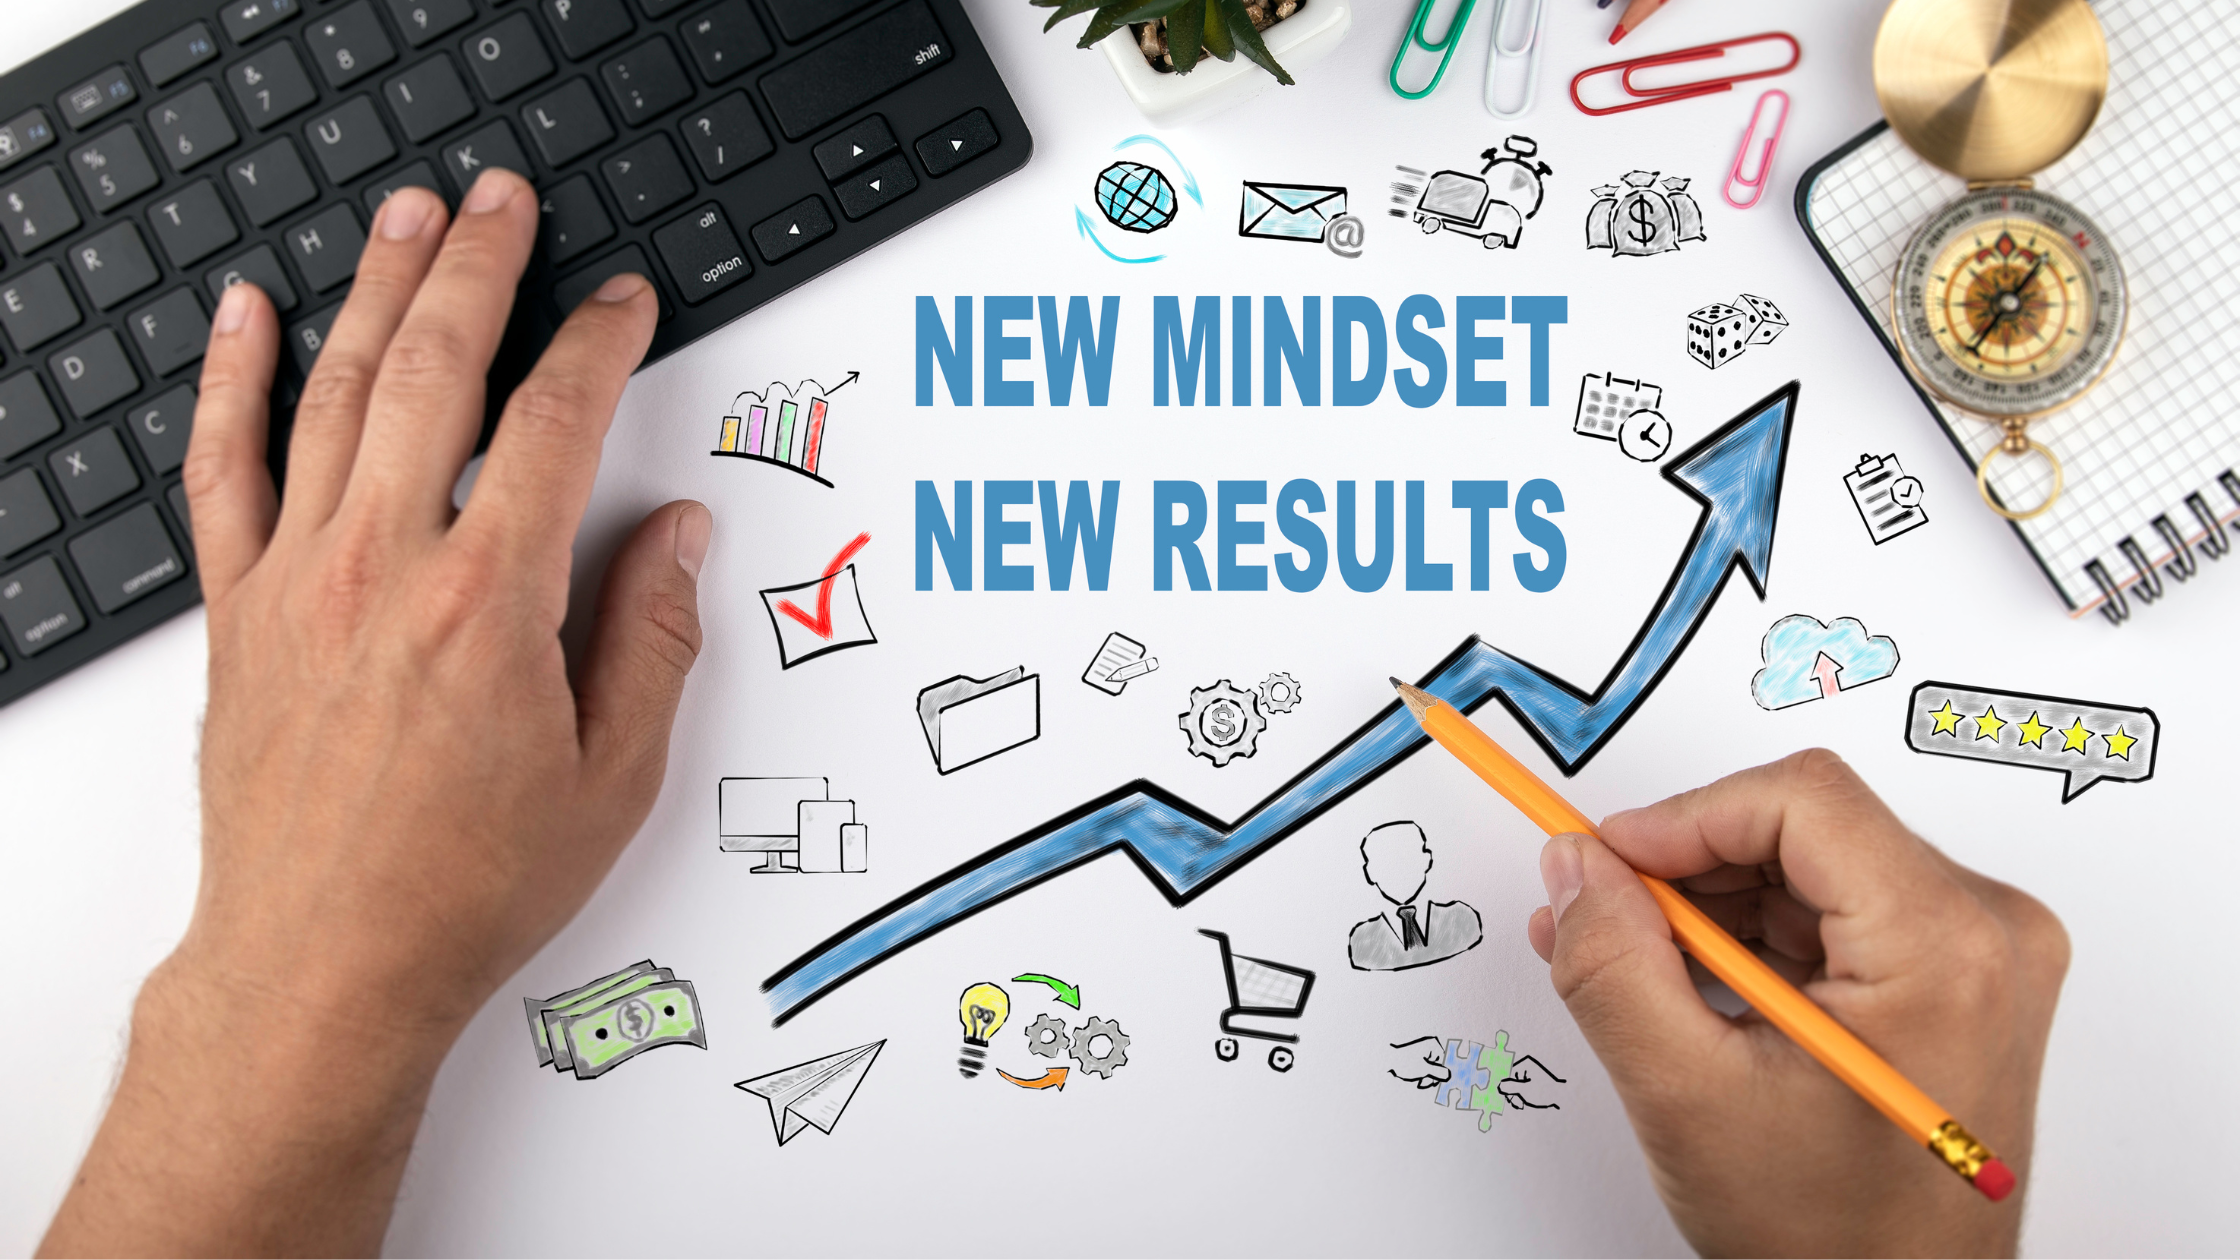 An image comprising a keyboard, paper clips, a compass, and a drawing that depicts a new mindset produces new results.